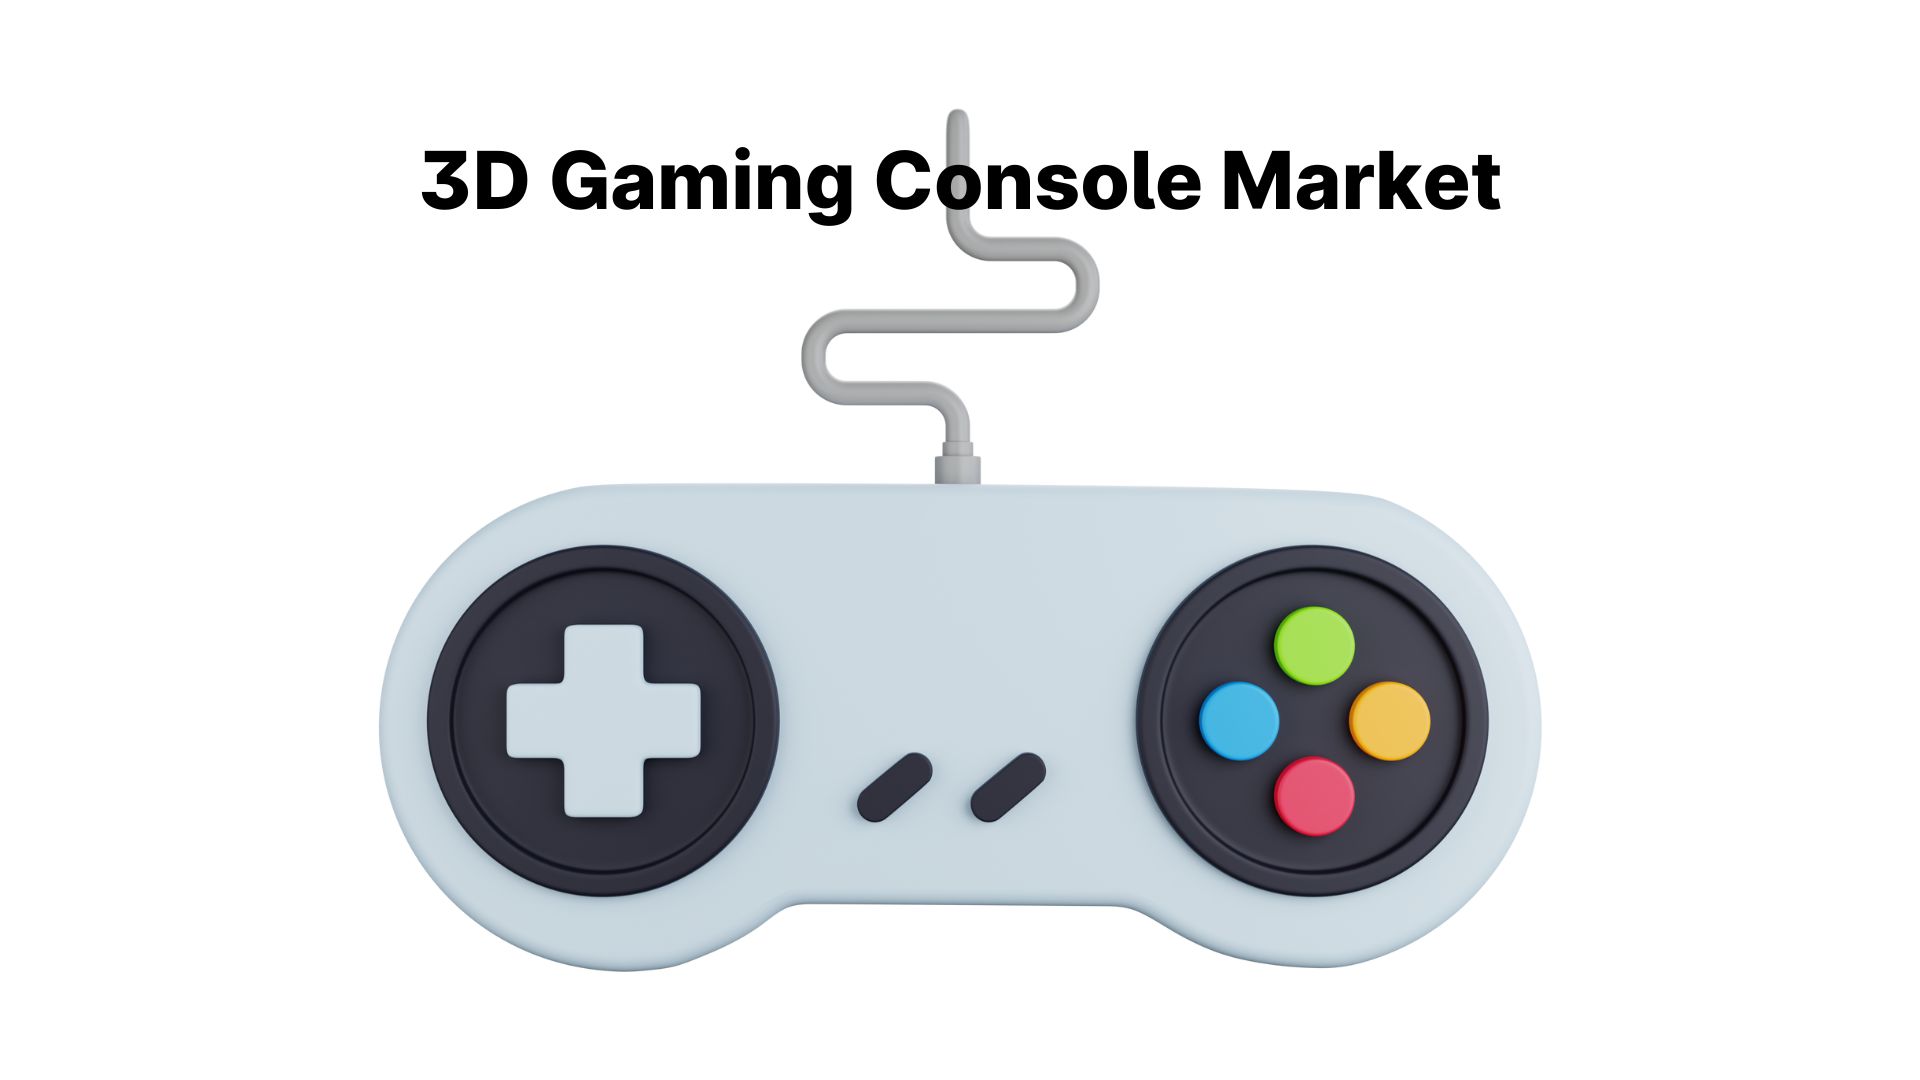 3D Gaming Console Market Anticipated to Achieve a 15% CAGR, Surpassing $44.1 Billion by 2032, According to Market.us Research